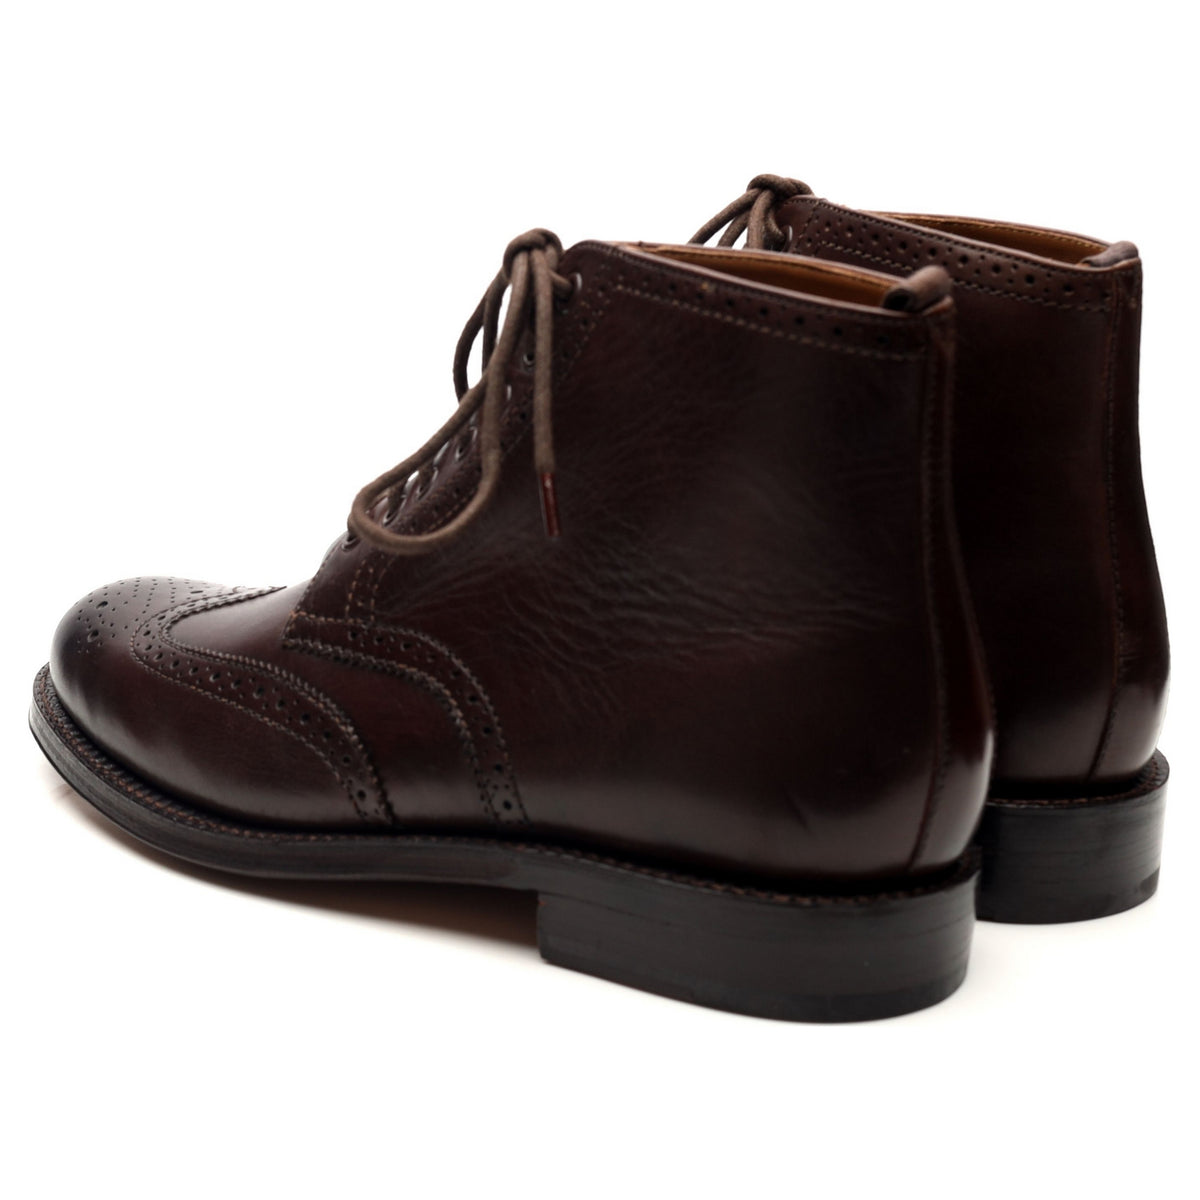 &#39;Sharp&#39; Dark Brown Leather Brogues Boots UK 7.5 G